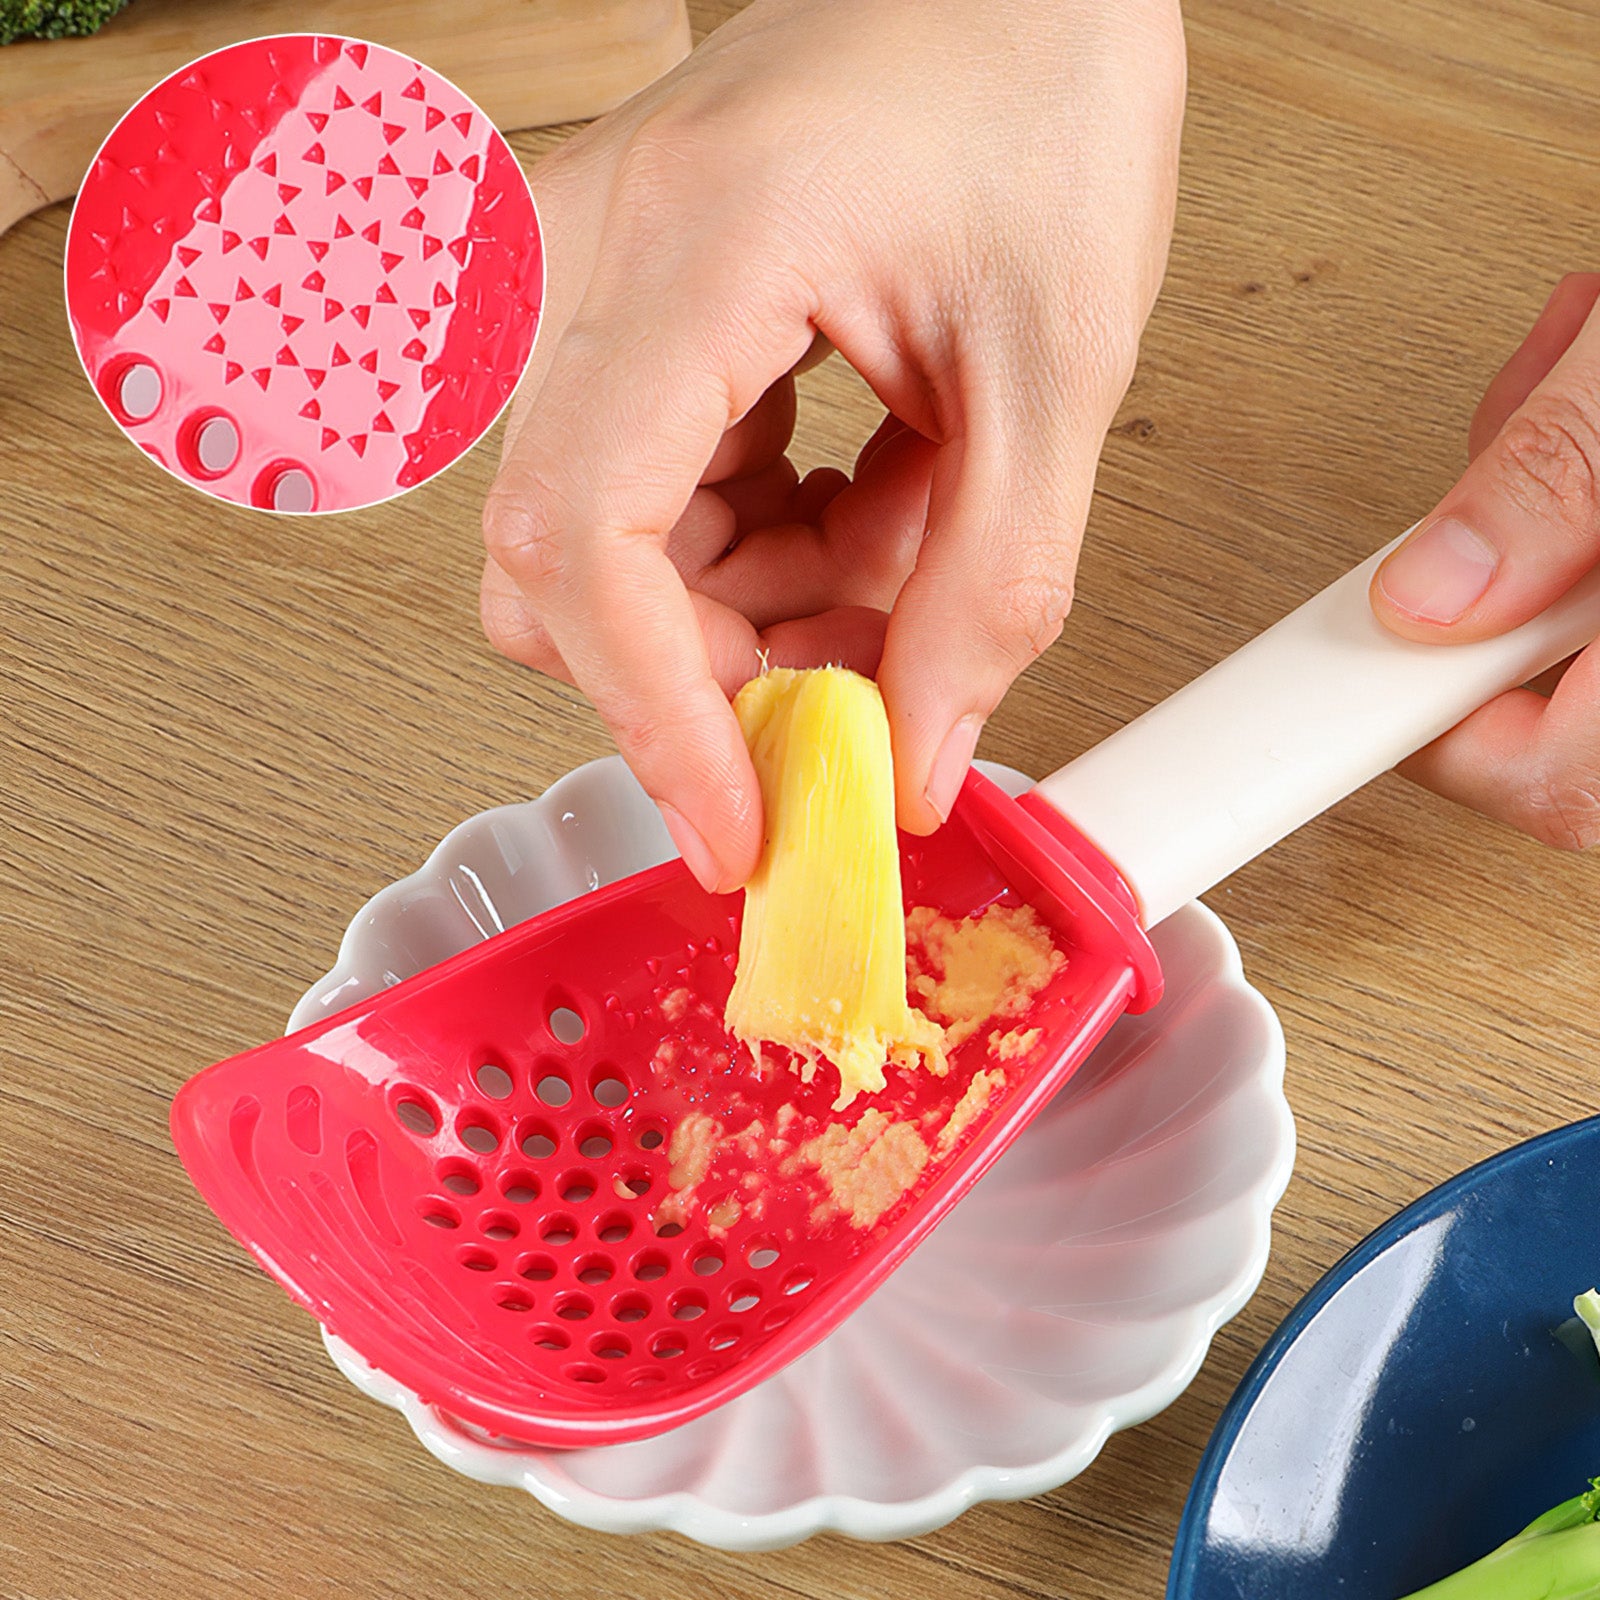 https://rekitch.co/cdn/shop/products/mainimage12pcs-Multifunctional-Cooking-Spoon-Kitchen-Tool-Skimmer-Scoop-Colander-Strainer-Grater-Masher-For-Cooking-Draining-Mashing.jpg?v=1658699484